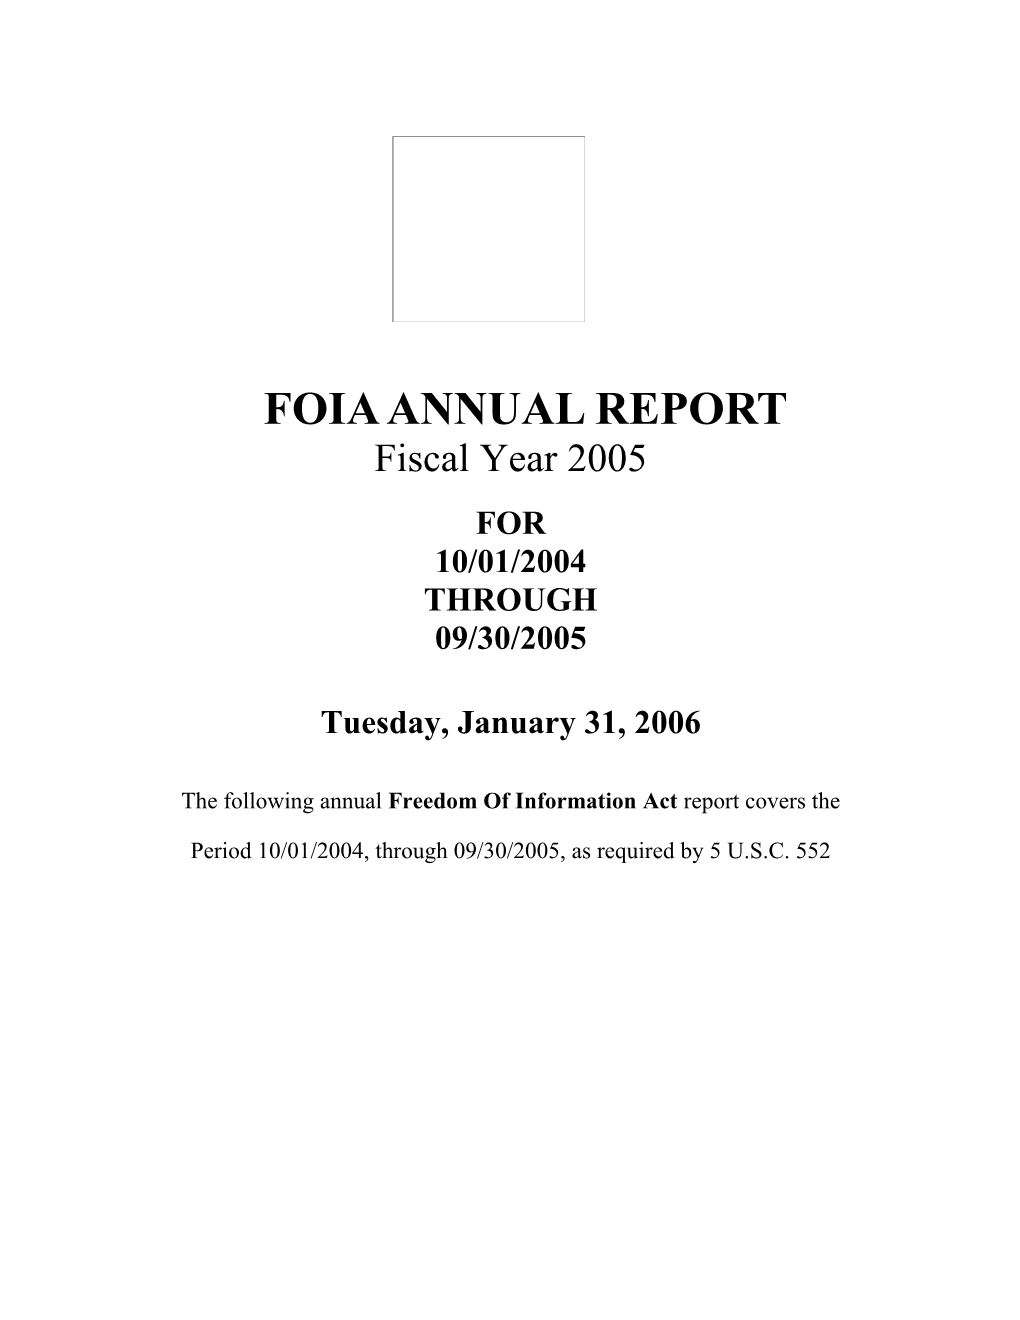 FOIA Anuual Report Fiscal Year 2005 (Word)